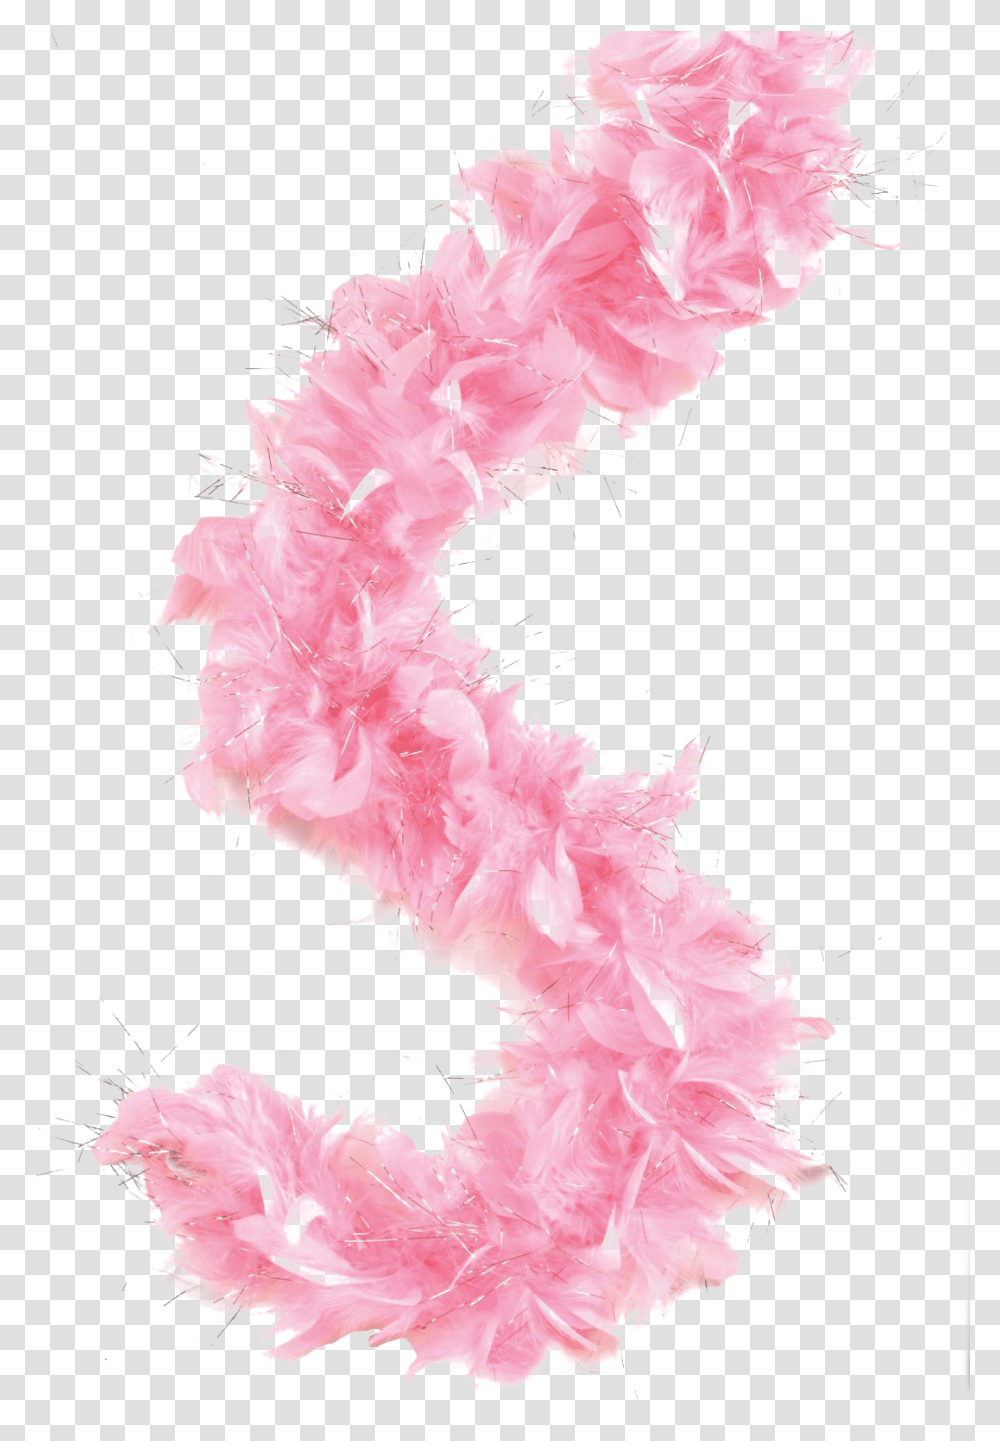 Feather Boa Picture Feather Boa, Apparel, Scarf Transparent Png